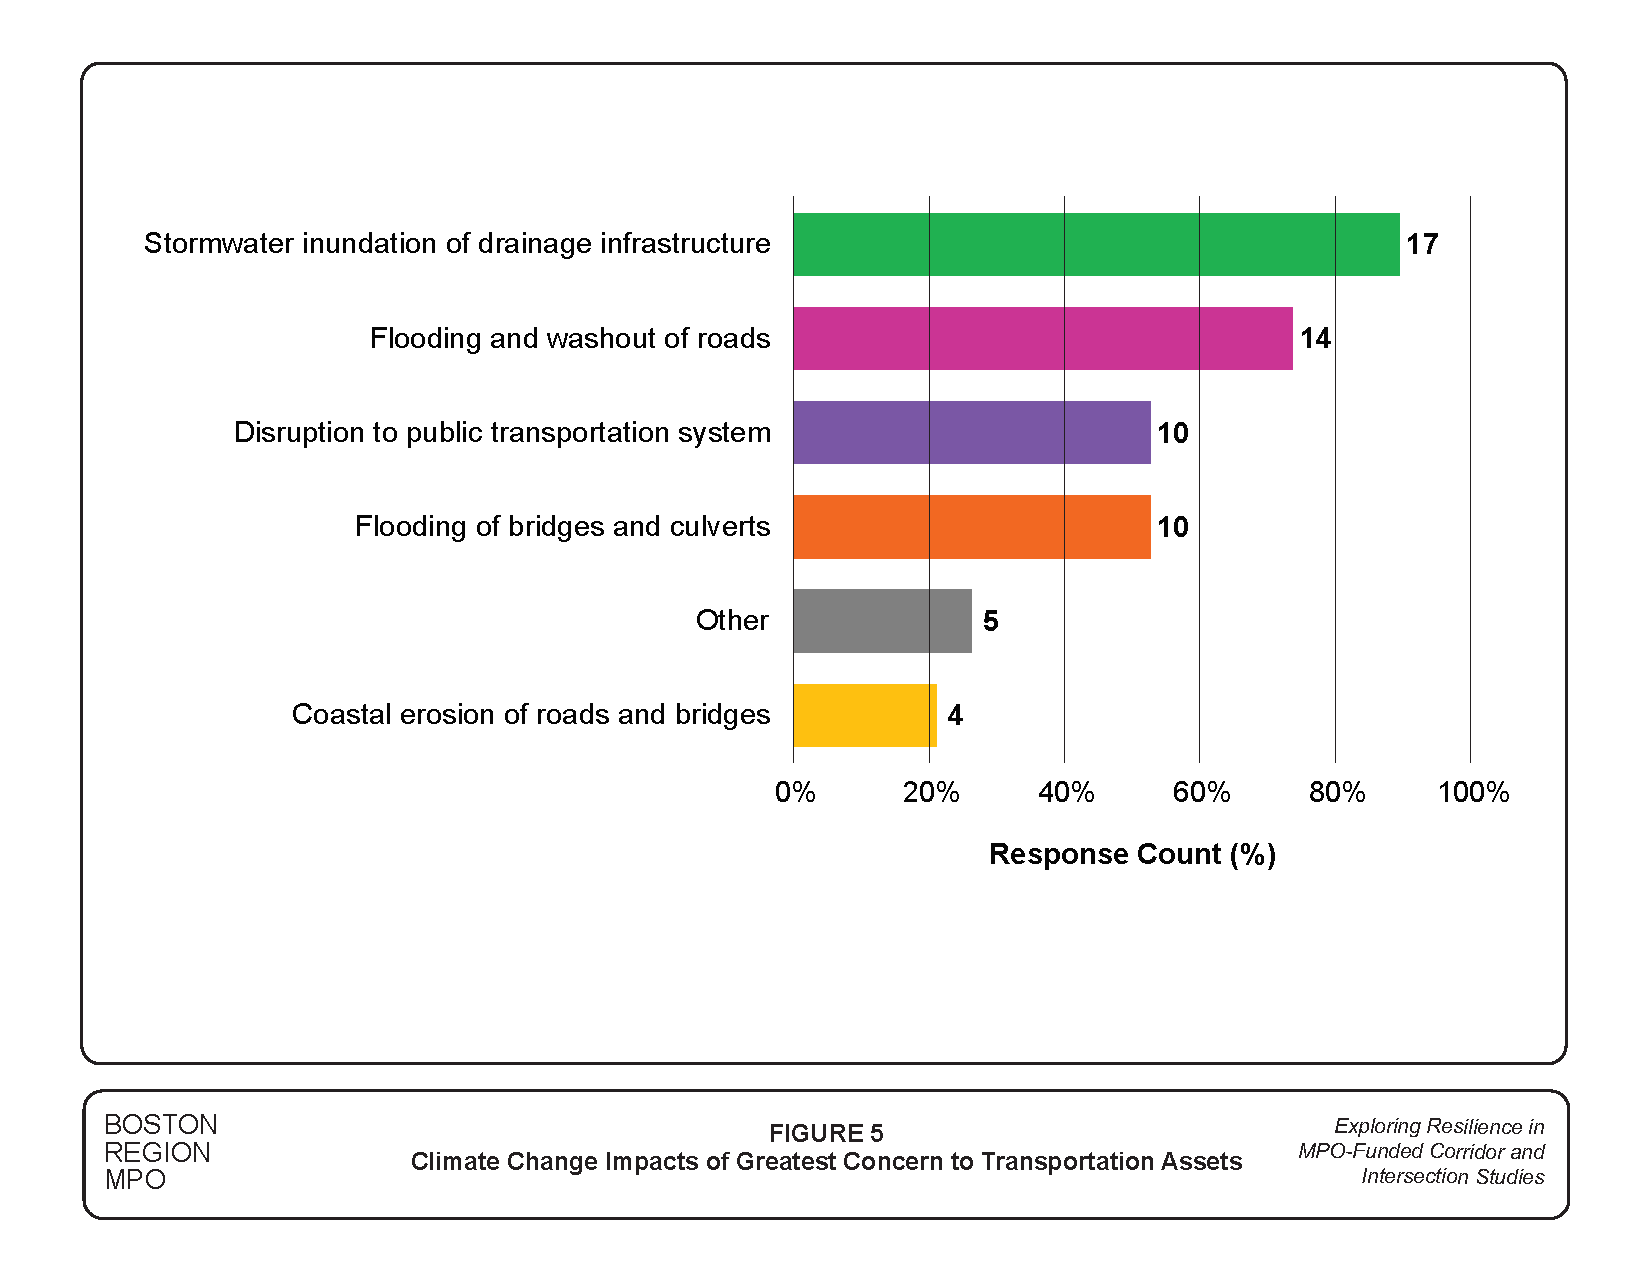 Figure 5 is a graph showing the survey results about climate change impacts that have been identified as of greatest concern to transportation assets.